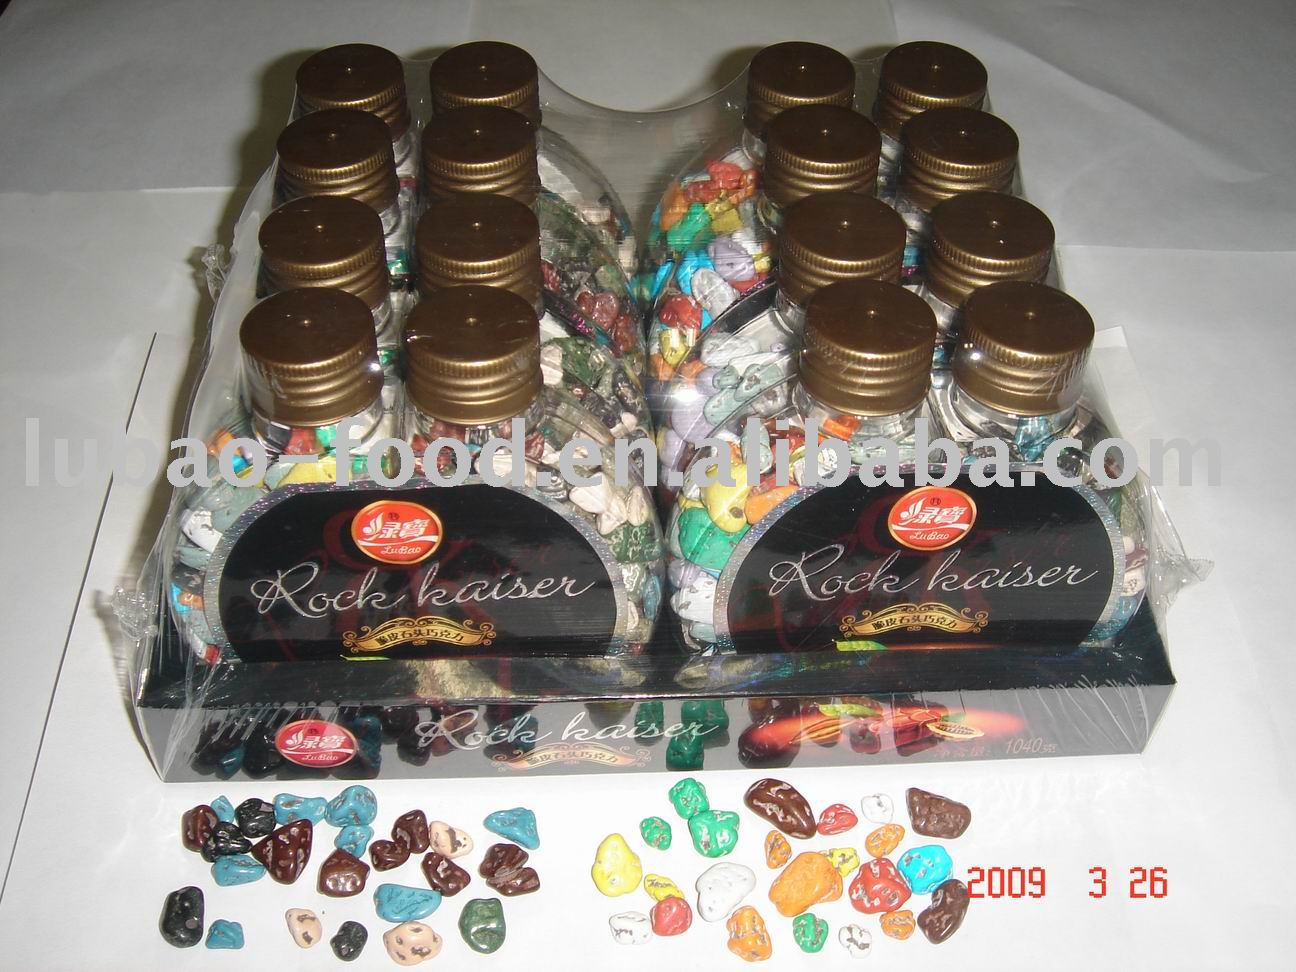  ... chocolate products,China Bottle pack Stone/Rock chocolate supplier